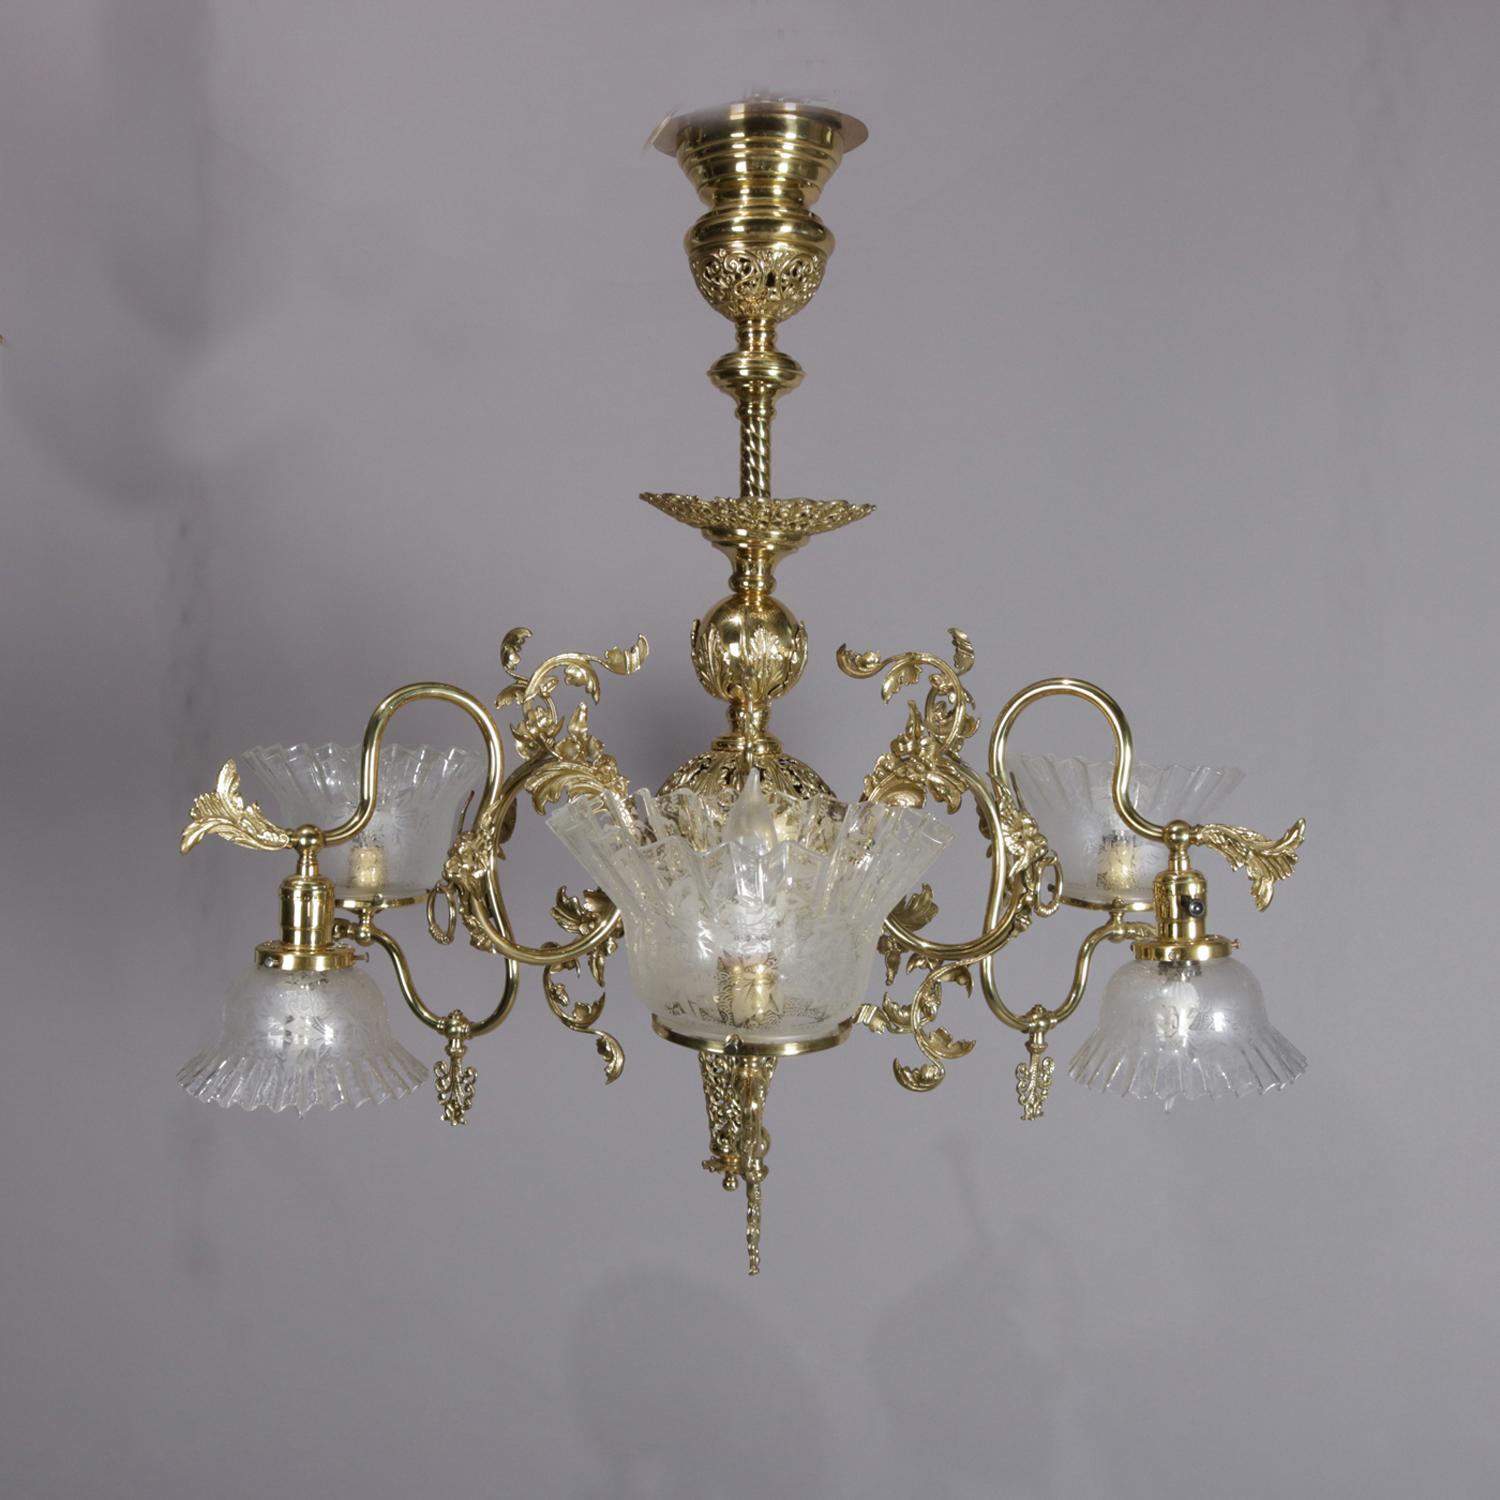 Cornelius School Gilt and Pierced White Metal Up and Down Six-Light Chandelier 1